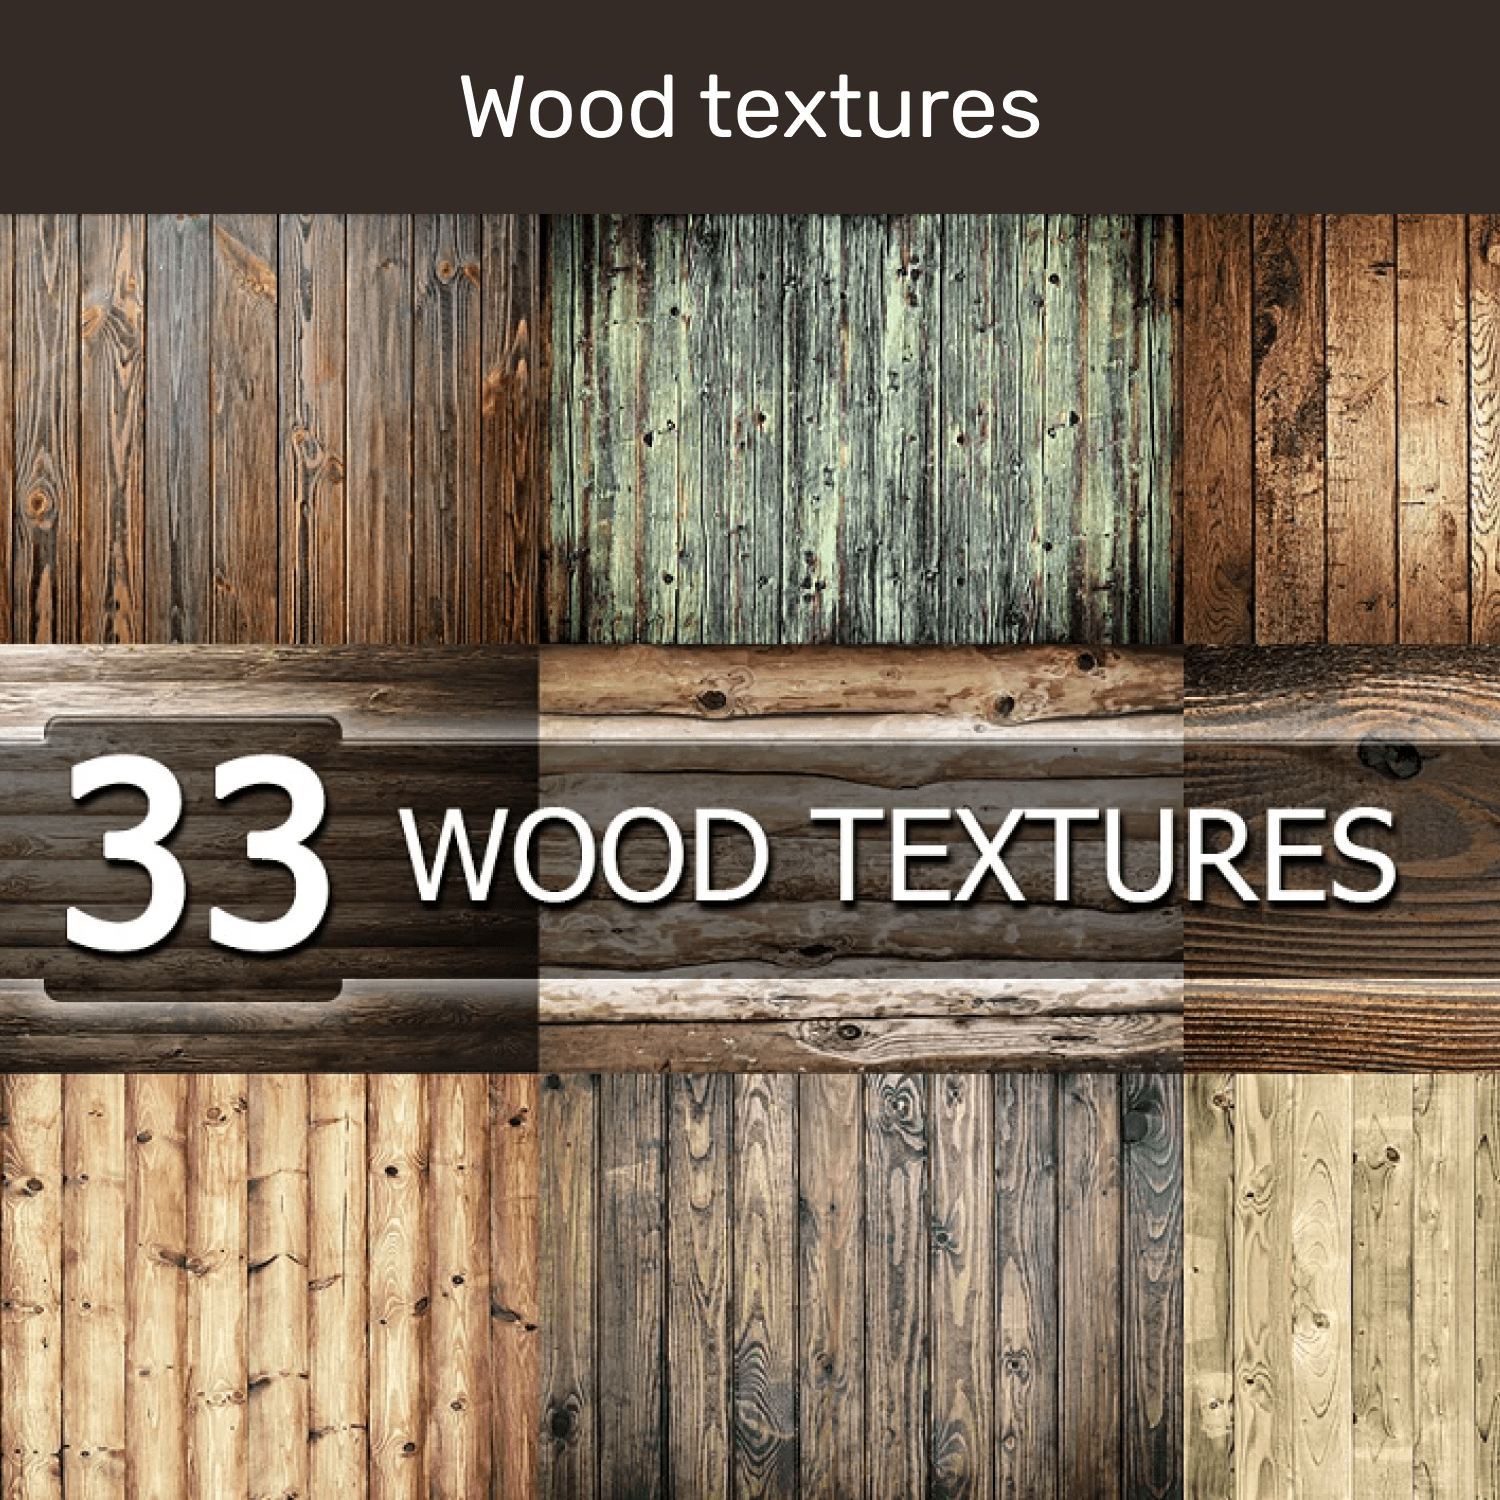 Wood textures cover.